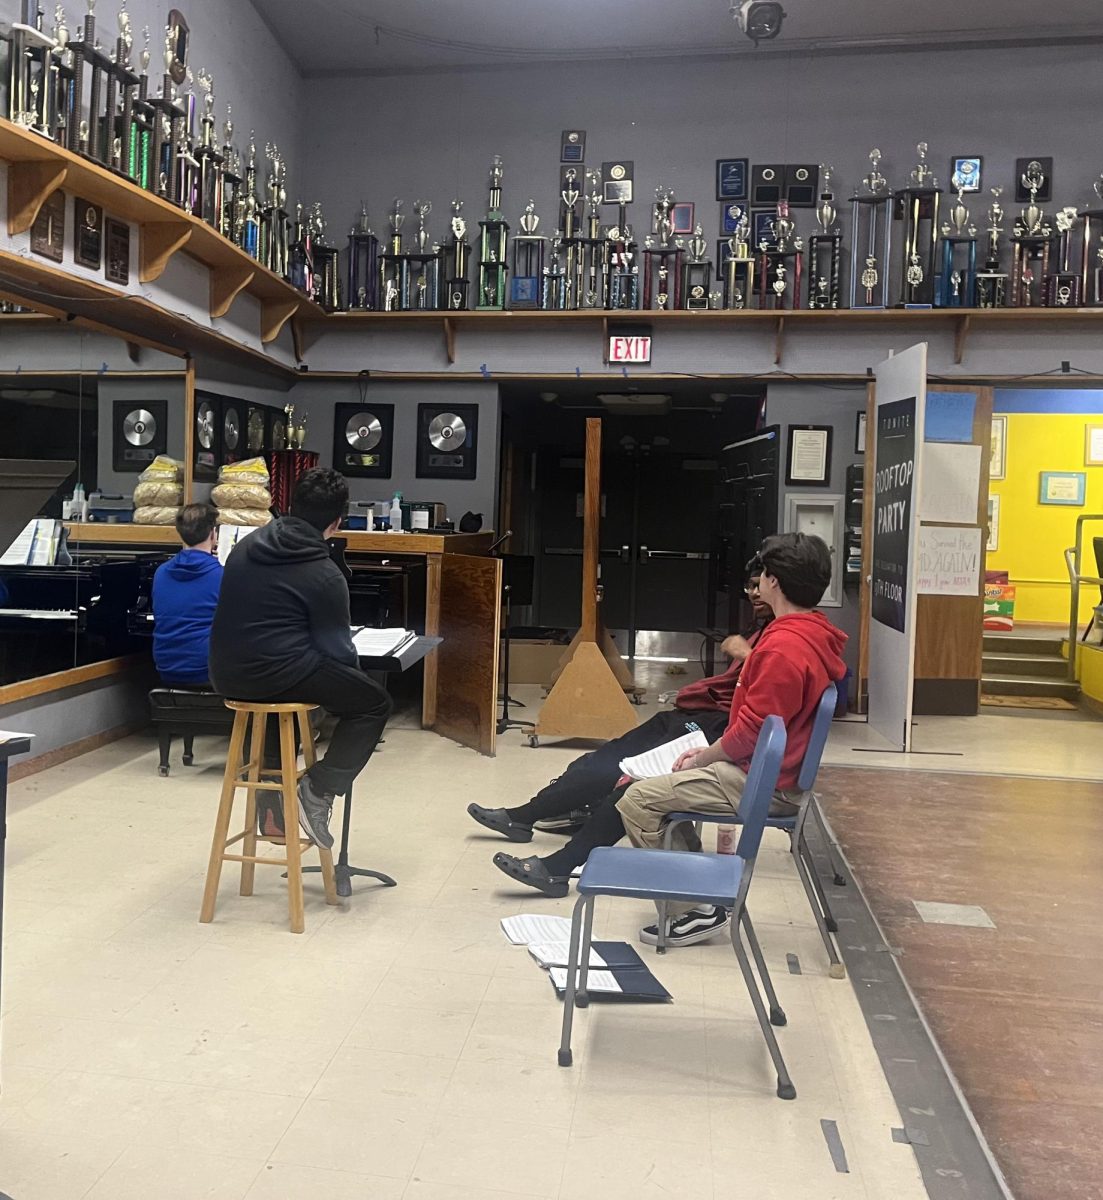 Bolles Theater is used by many at BVH. This theater is specifically used  by the Vocal Music Department (VMD) and Drama department that is included in BVHs Visual and Performing Arts (VAPA) programs.